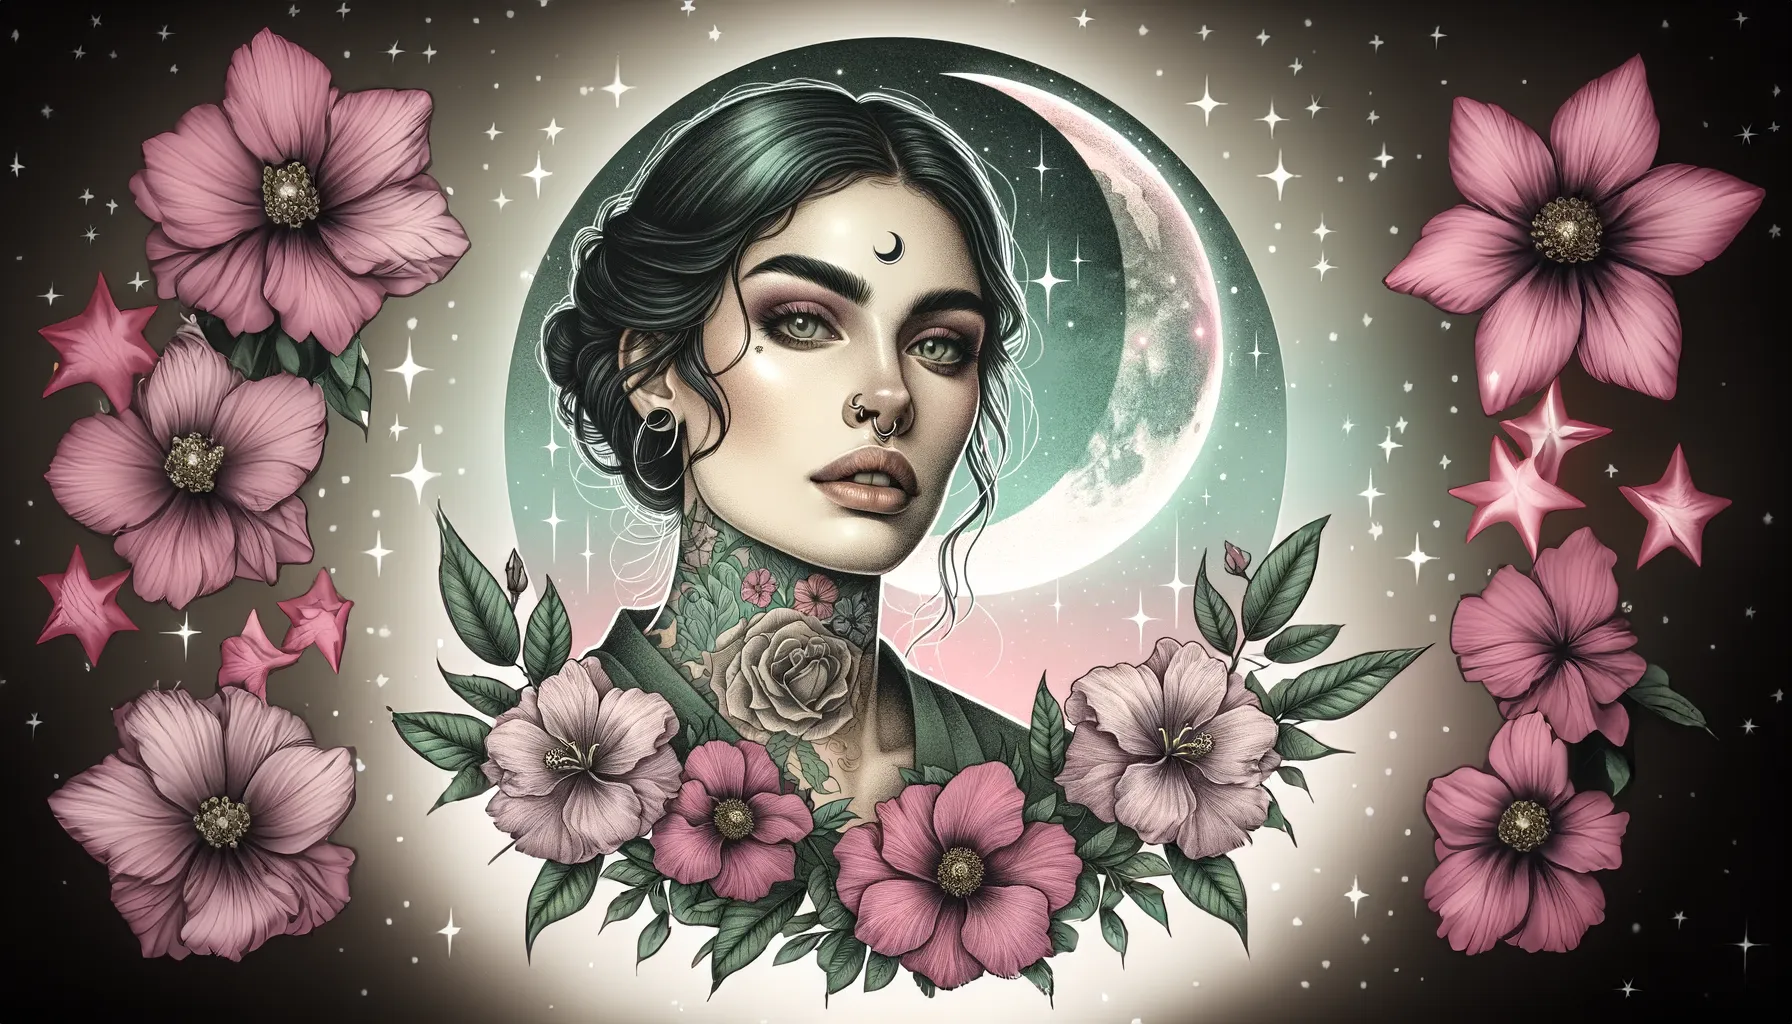 A portrait of a woman with tattoos surrounded by flowers in front of the Waxing Crescent Moon.